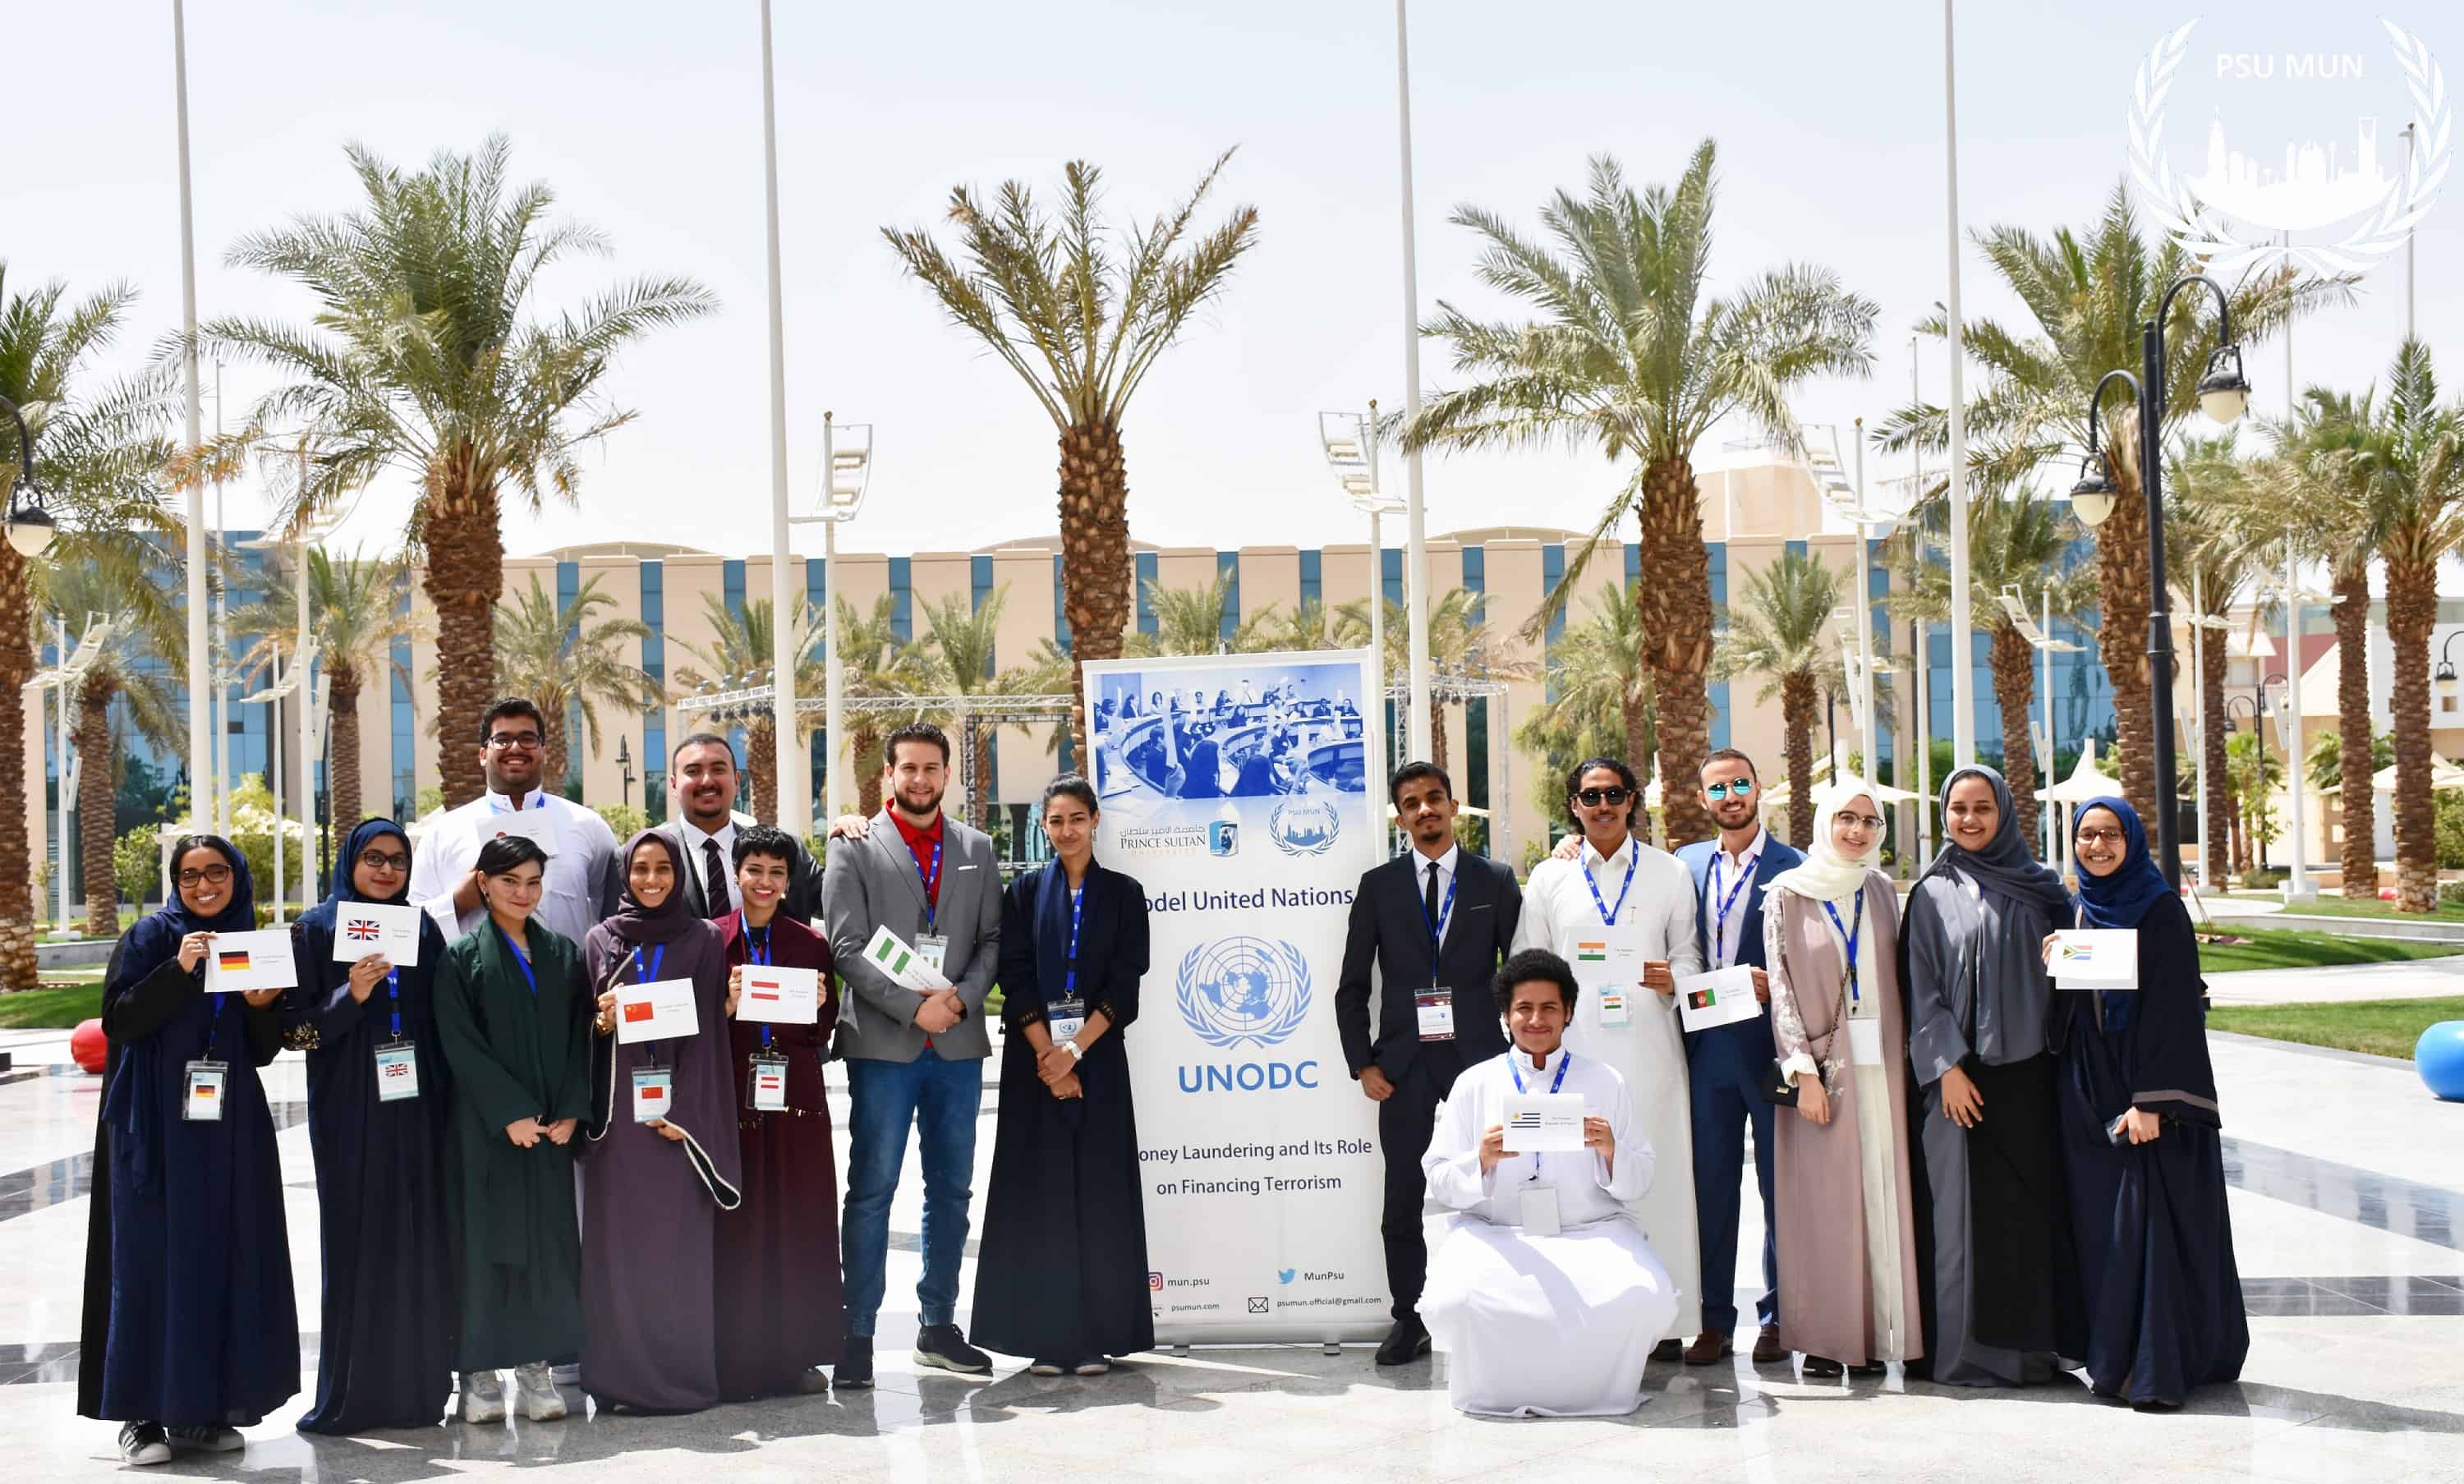 Prince Sultan University Organized (Model United Nations) for the First Time, 80 Applicants out of 300 Applicants were Accepted from all over Saudi Arabia